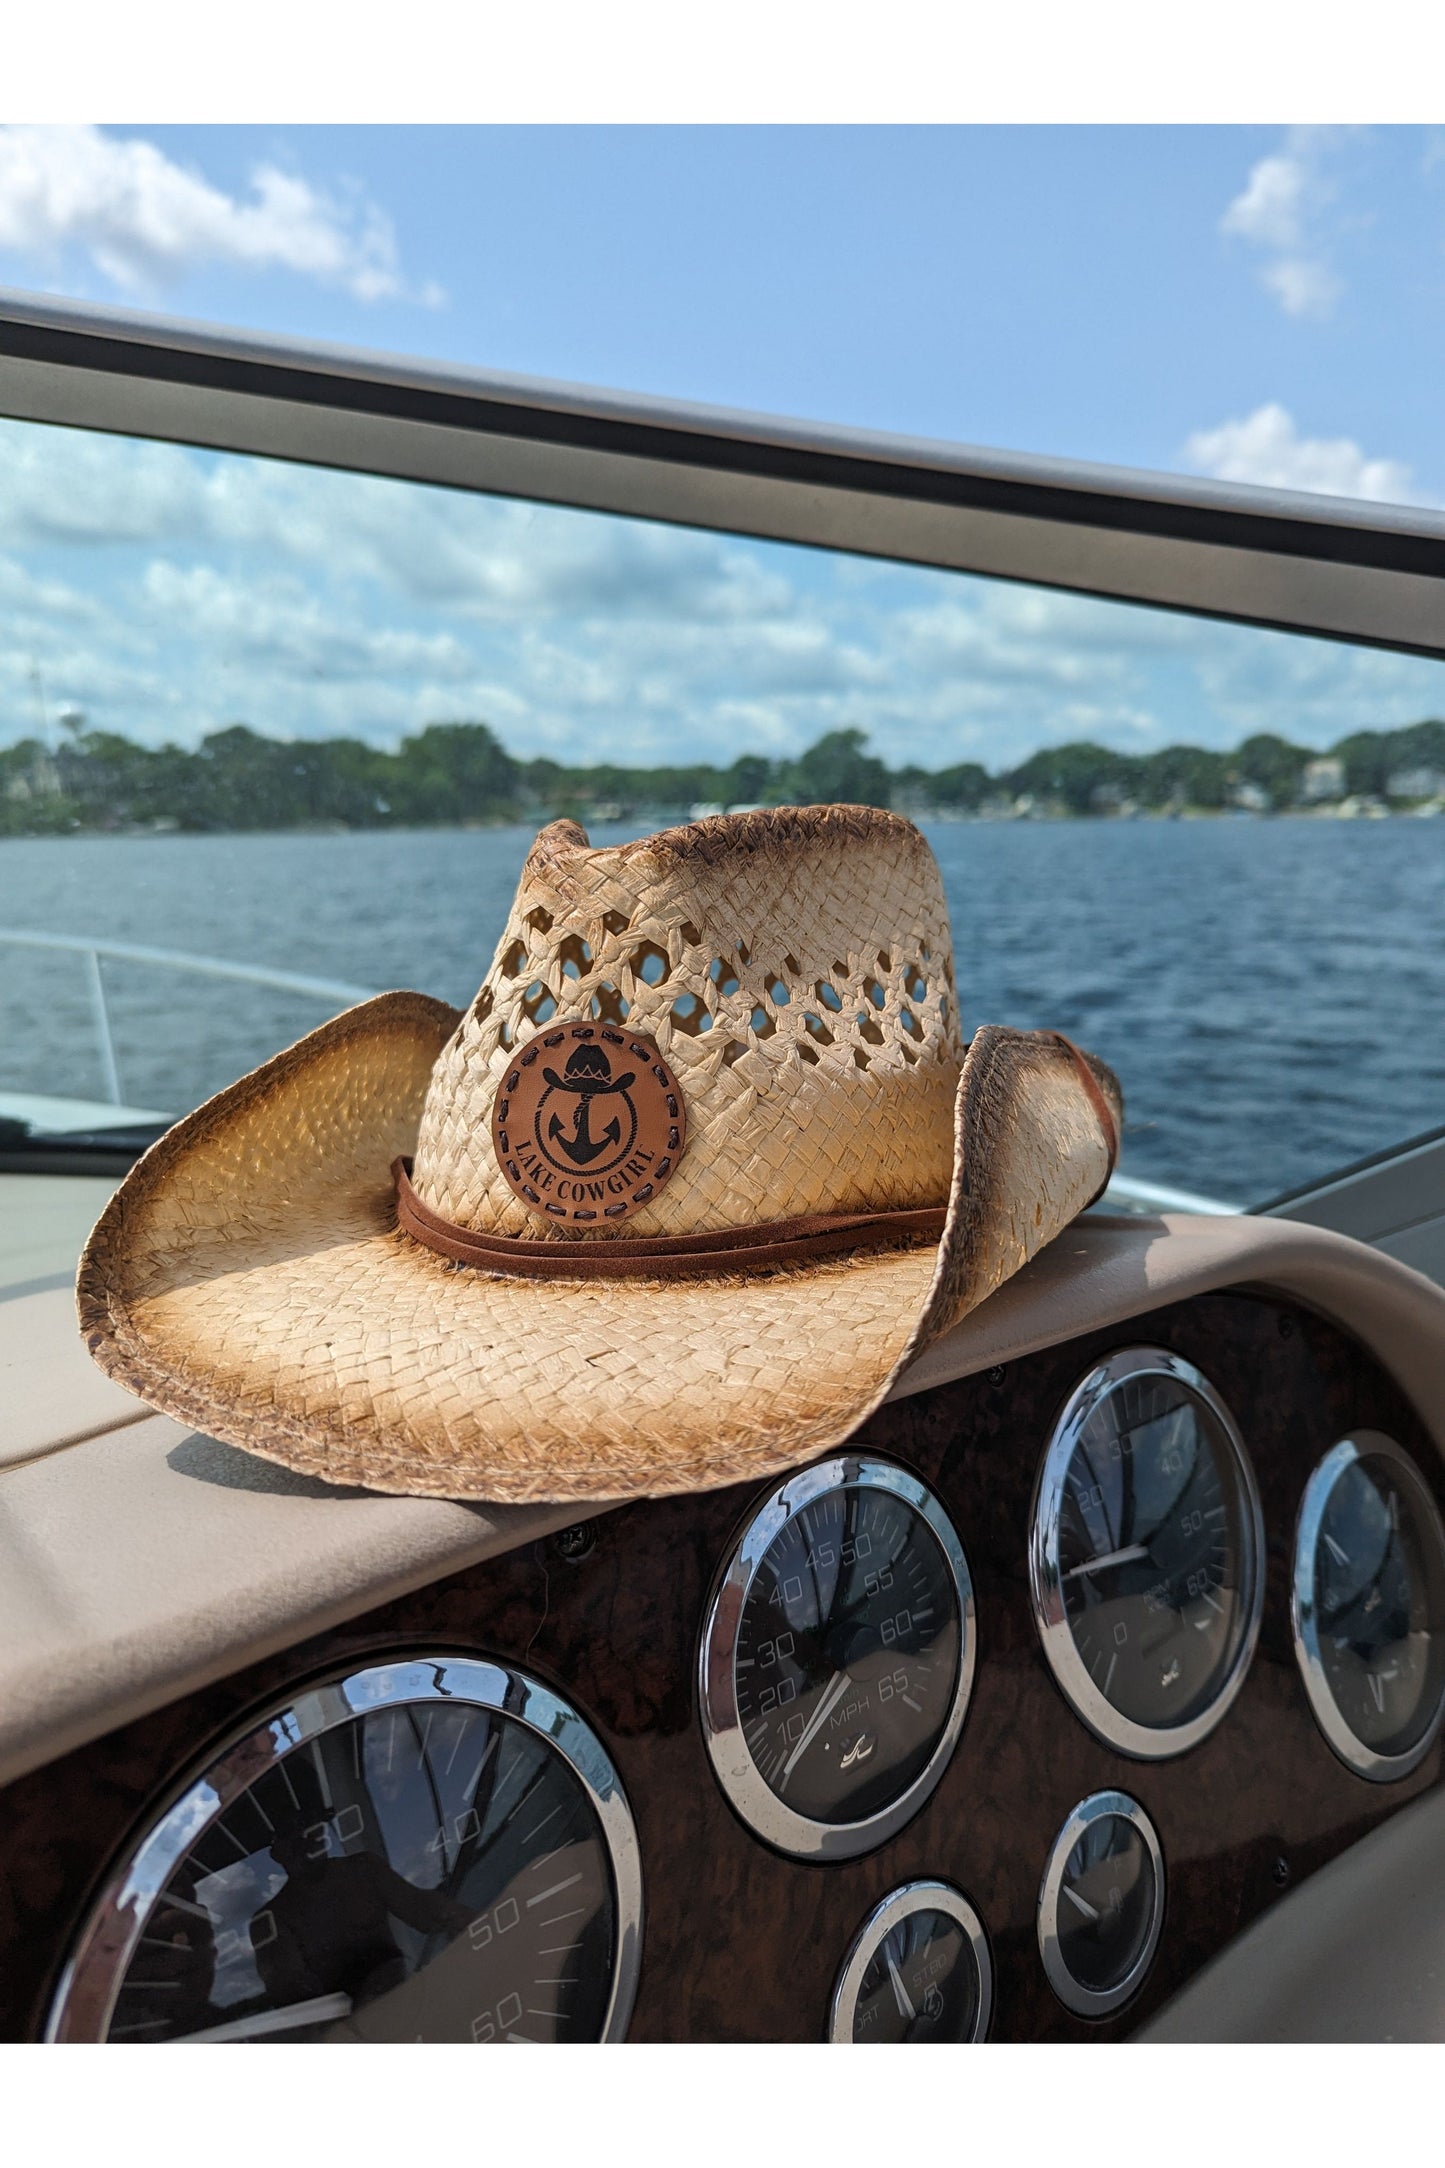 Photo of the Lake Cowgirl Signature Cowboy Hat shown sitting atop a boat console. Photo was taken on Lake Minnetonka.